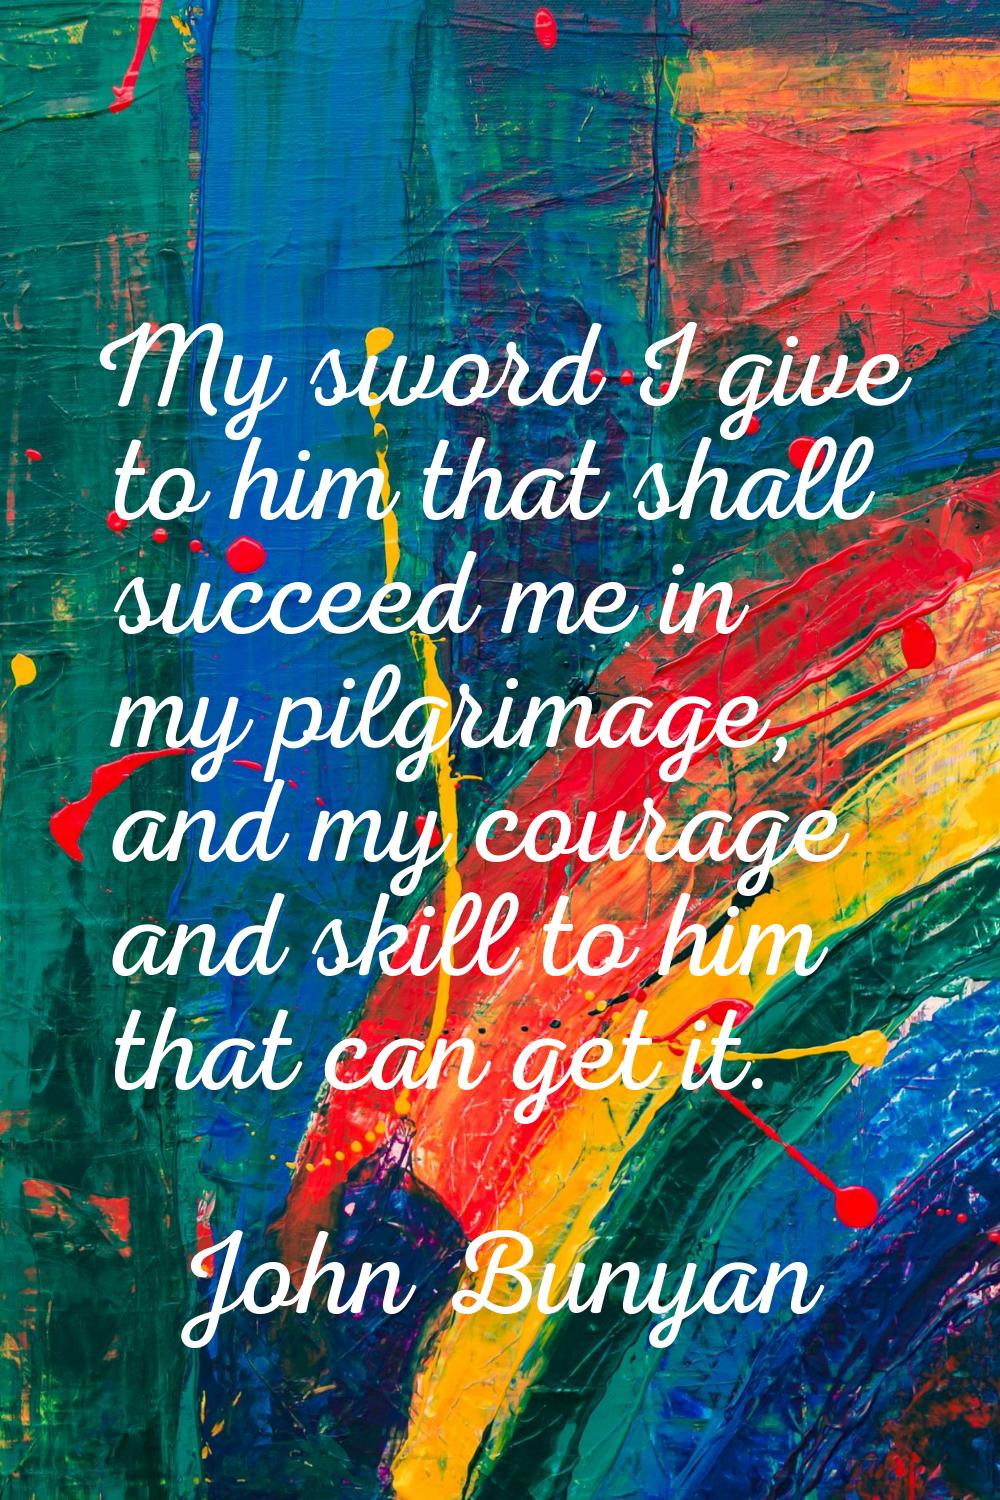 My sword I give to him that shall succeed me in my pilgrimage, and my courage and skill to him that